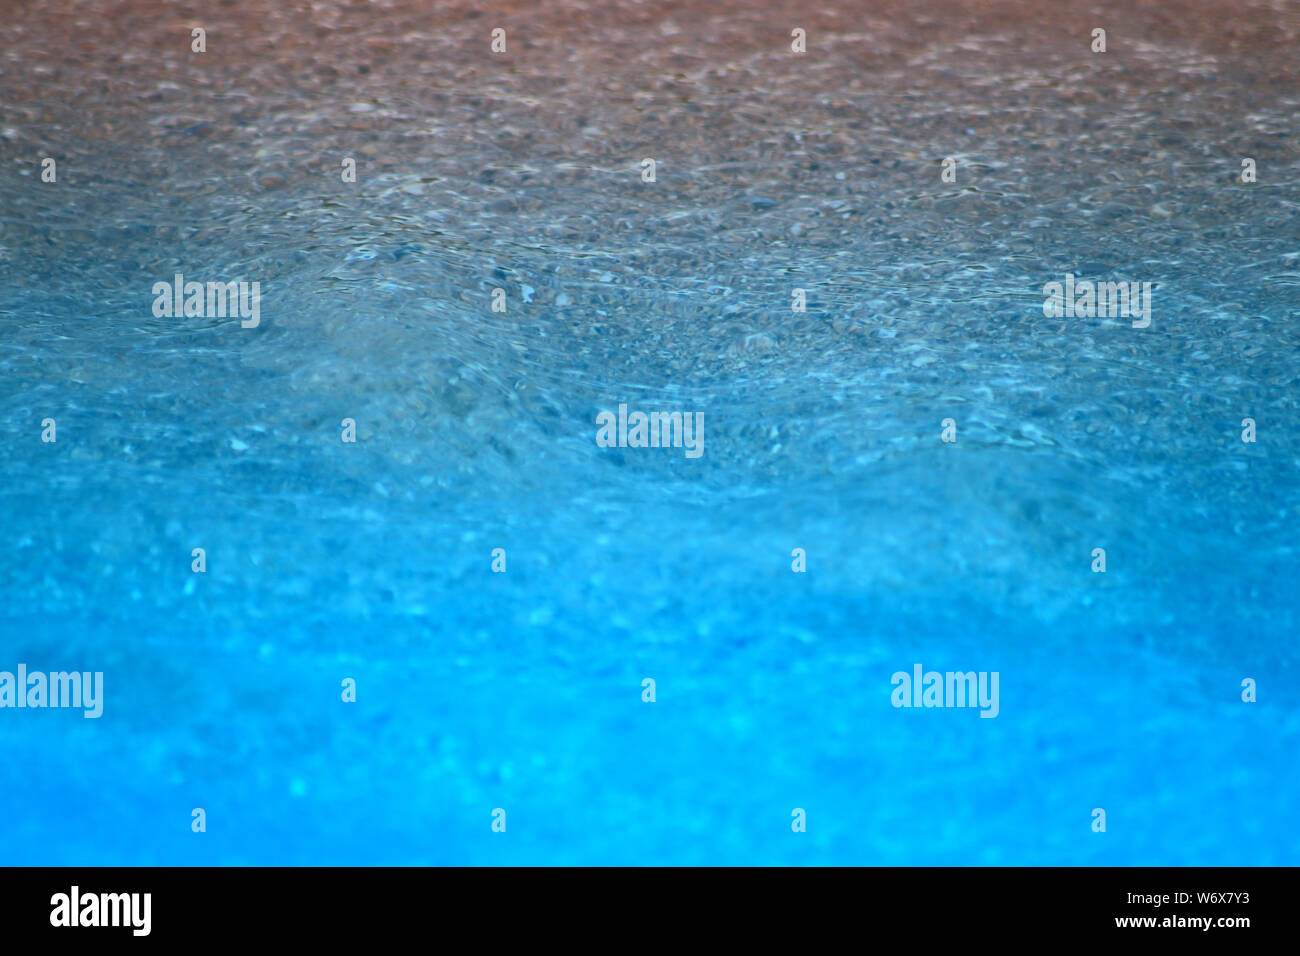 Abstract with copy space Stock Photo